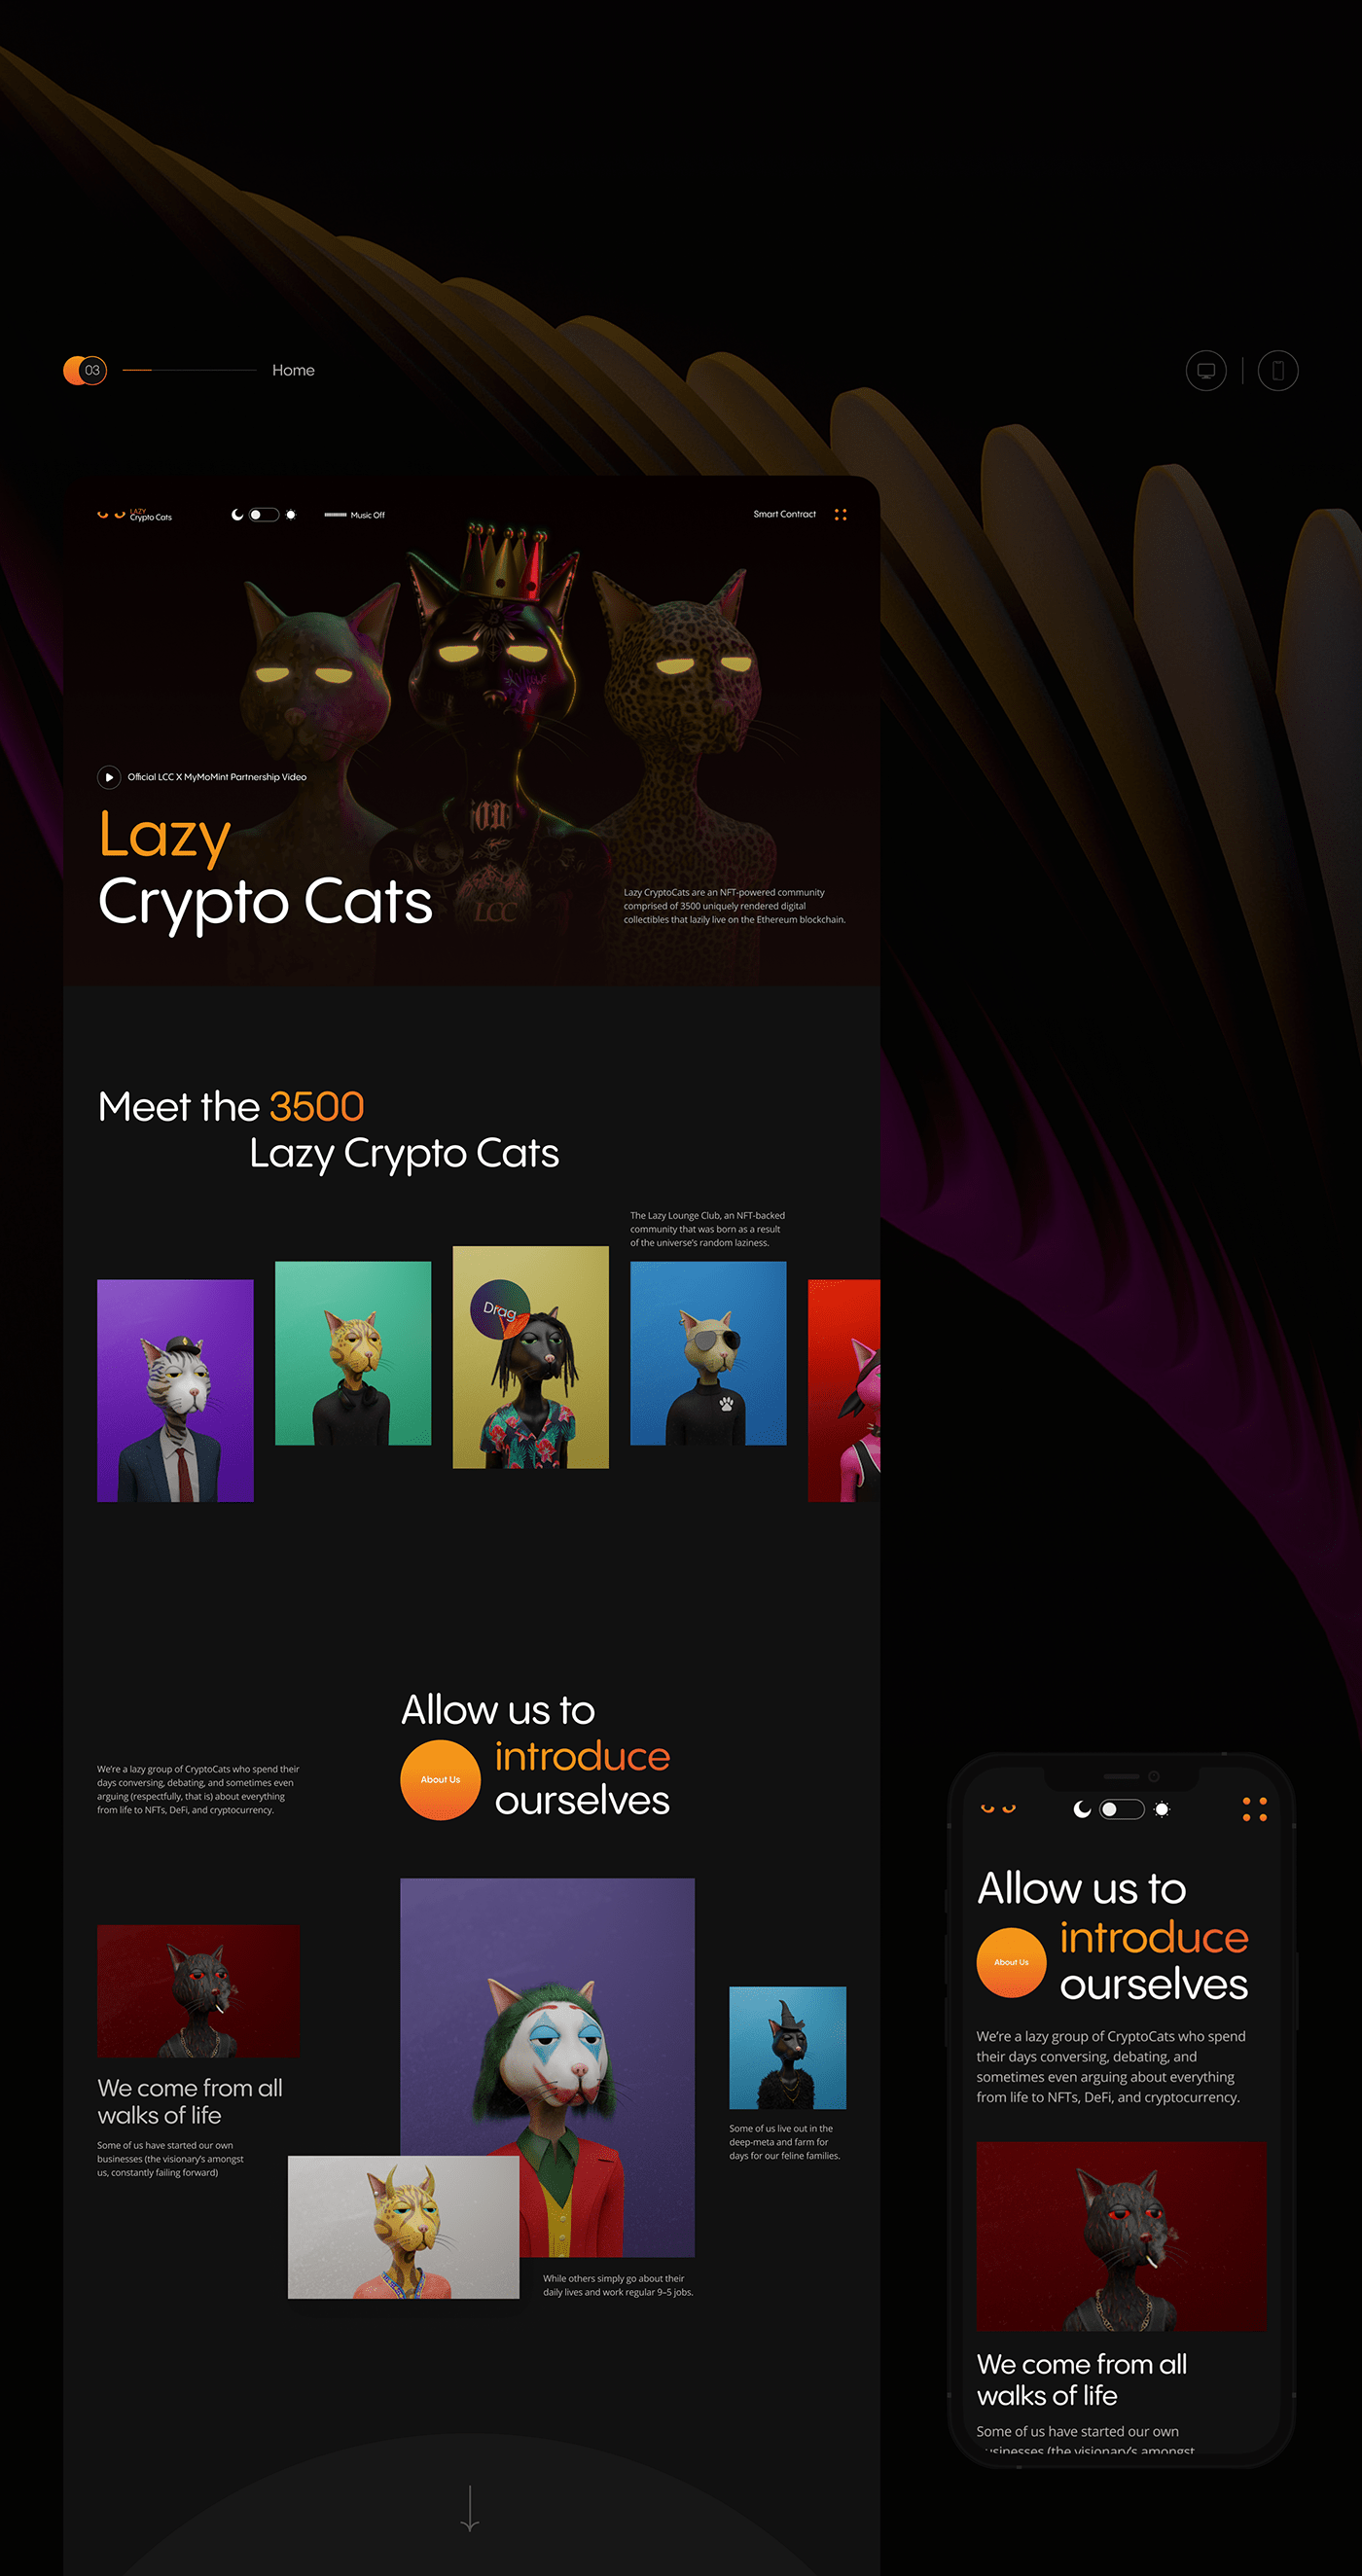 Home page, Lazy Crypto Cats website. Desktop & mobile.